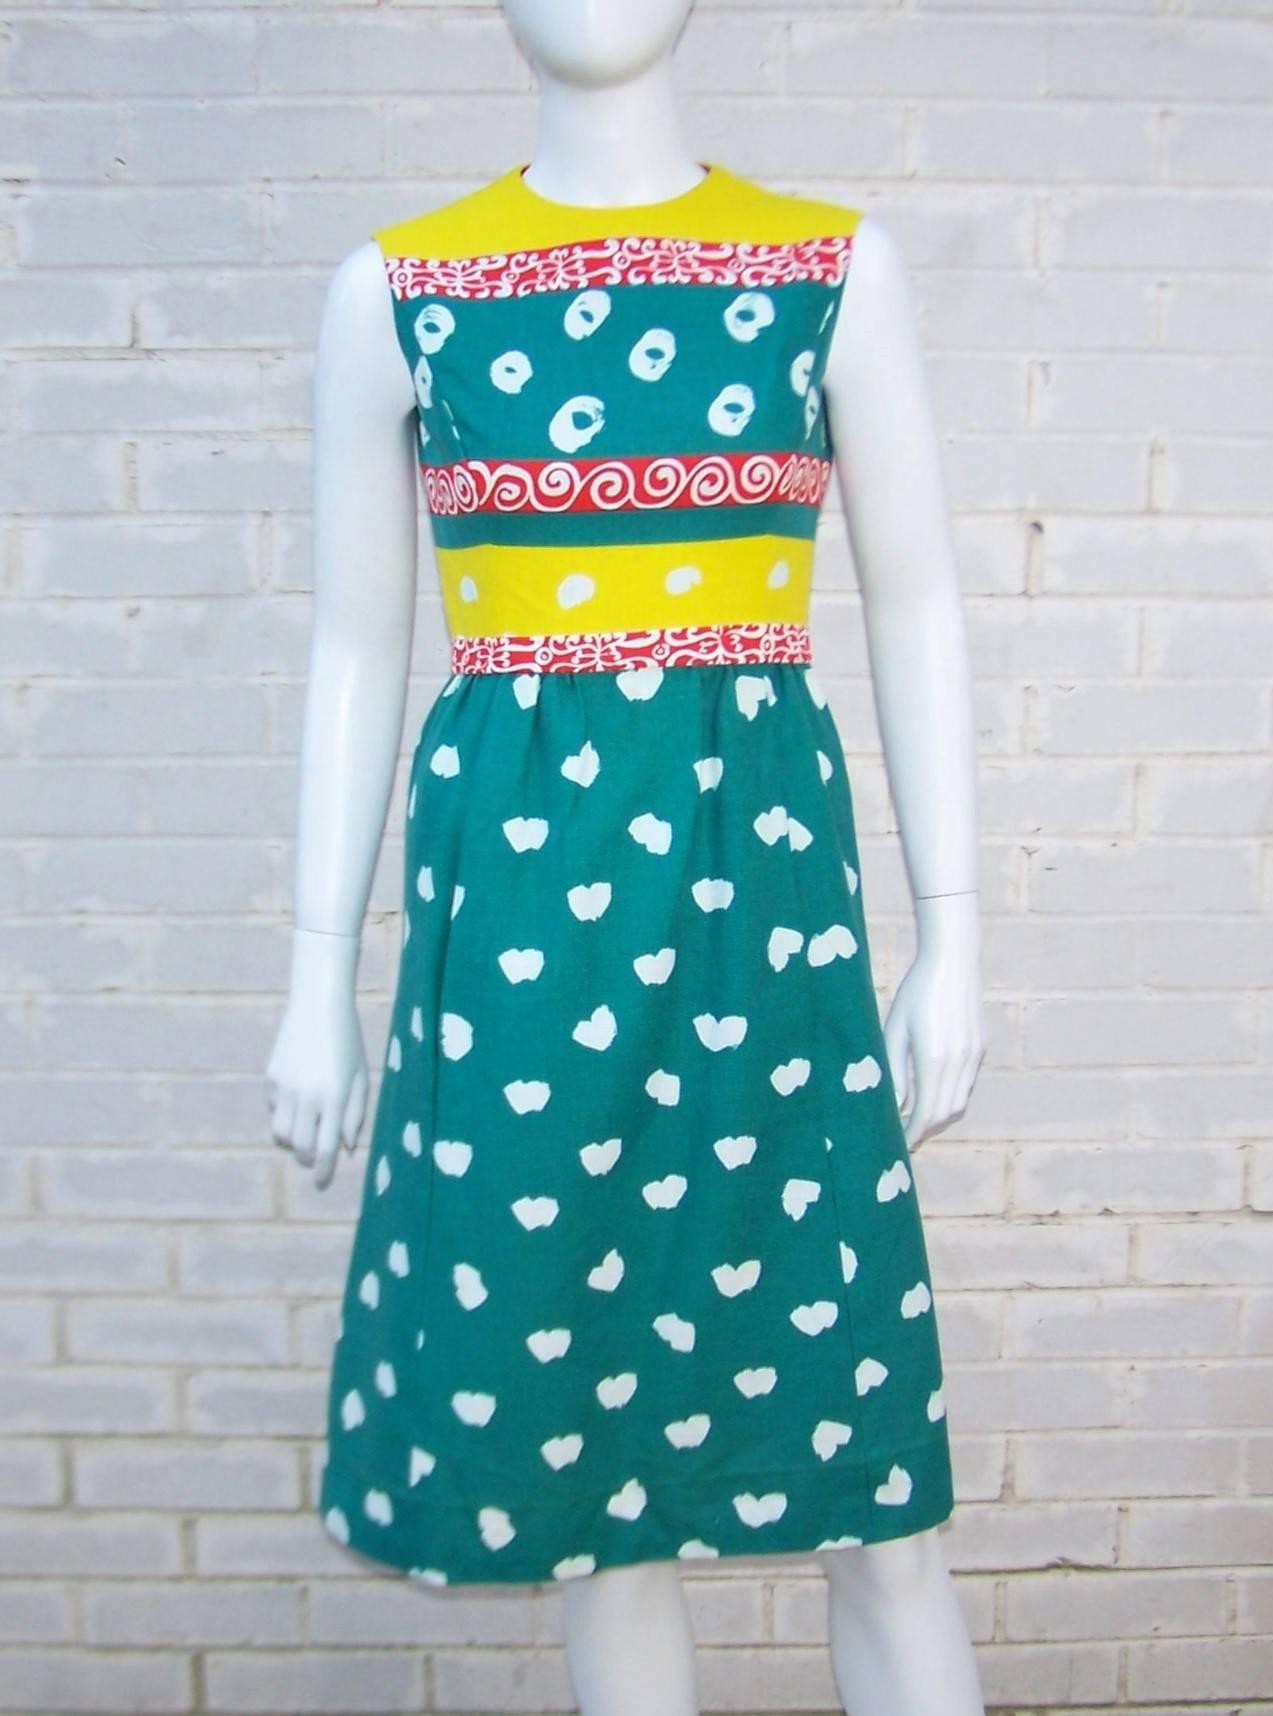 Get ready for a color punch with this C.1970 Elinor Simmons design for Malcolm Starr.  The two piece dress set combines teal green, bright yellow, tomato red  and white colors in a heavy linen fabric.  The abstract pop art patterns are akin to a